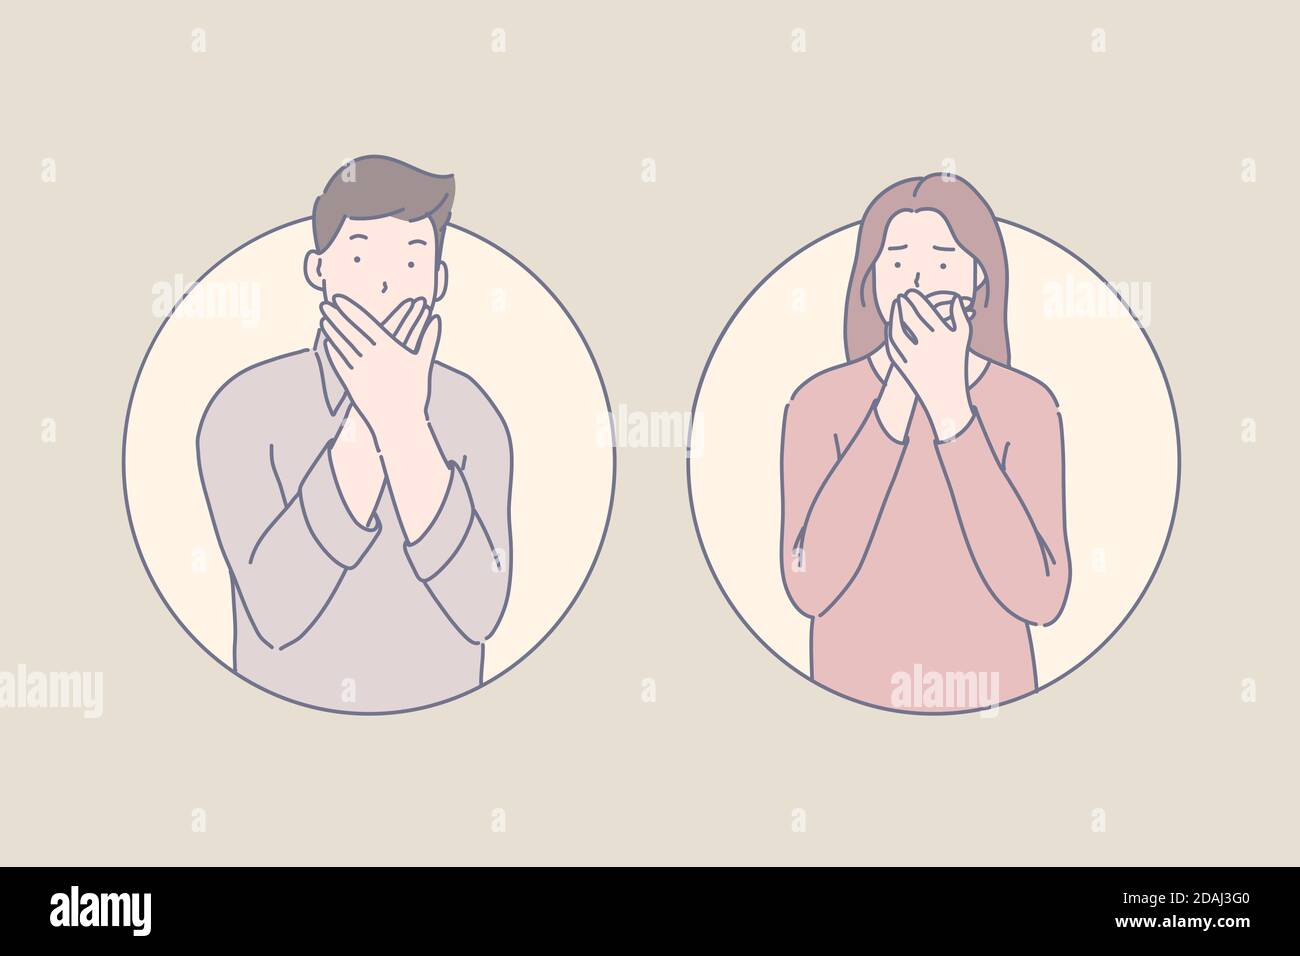 Speechless victim, insecurity, frightened eyewitness concept. People covering mouth in despair. Silent protest, intimidated people refusing to speak. Stock Vector